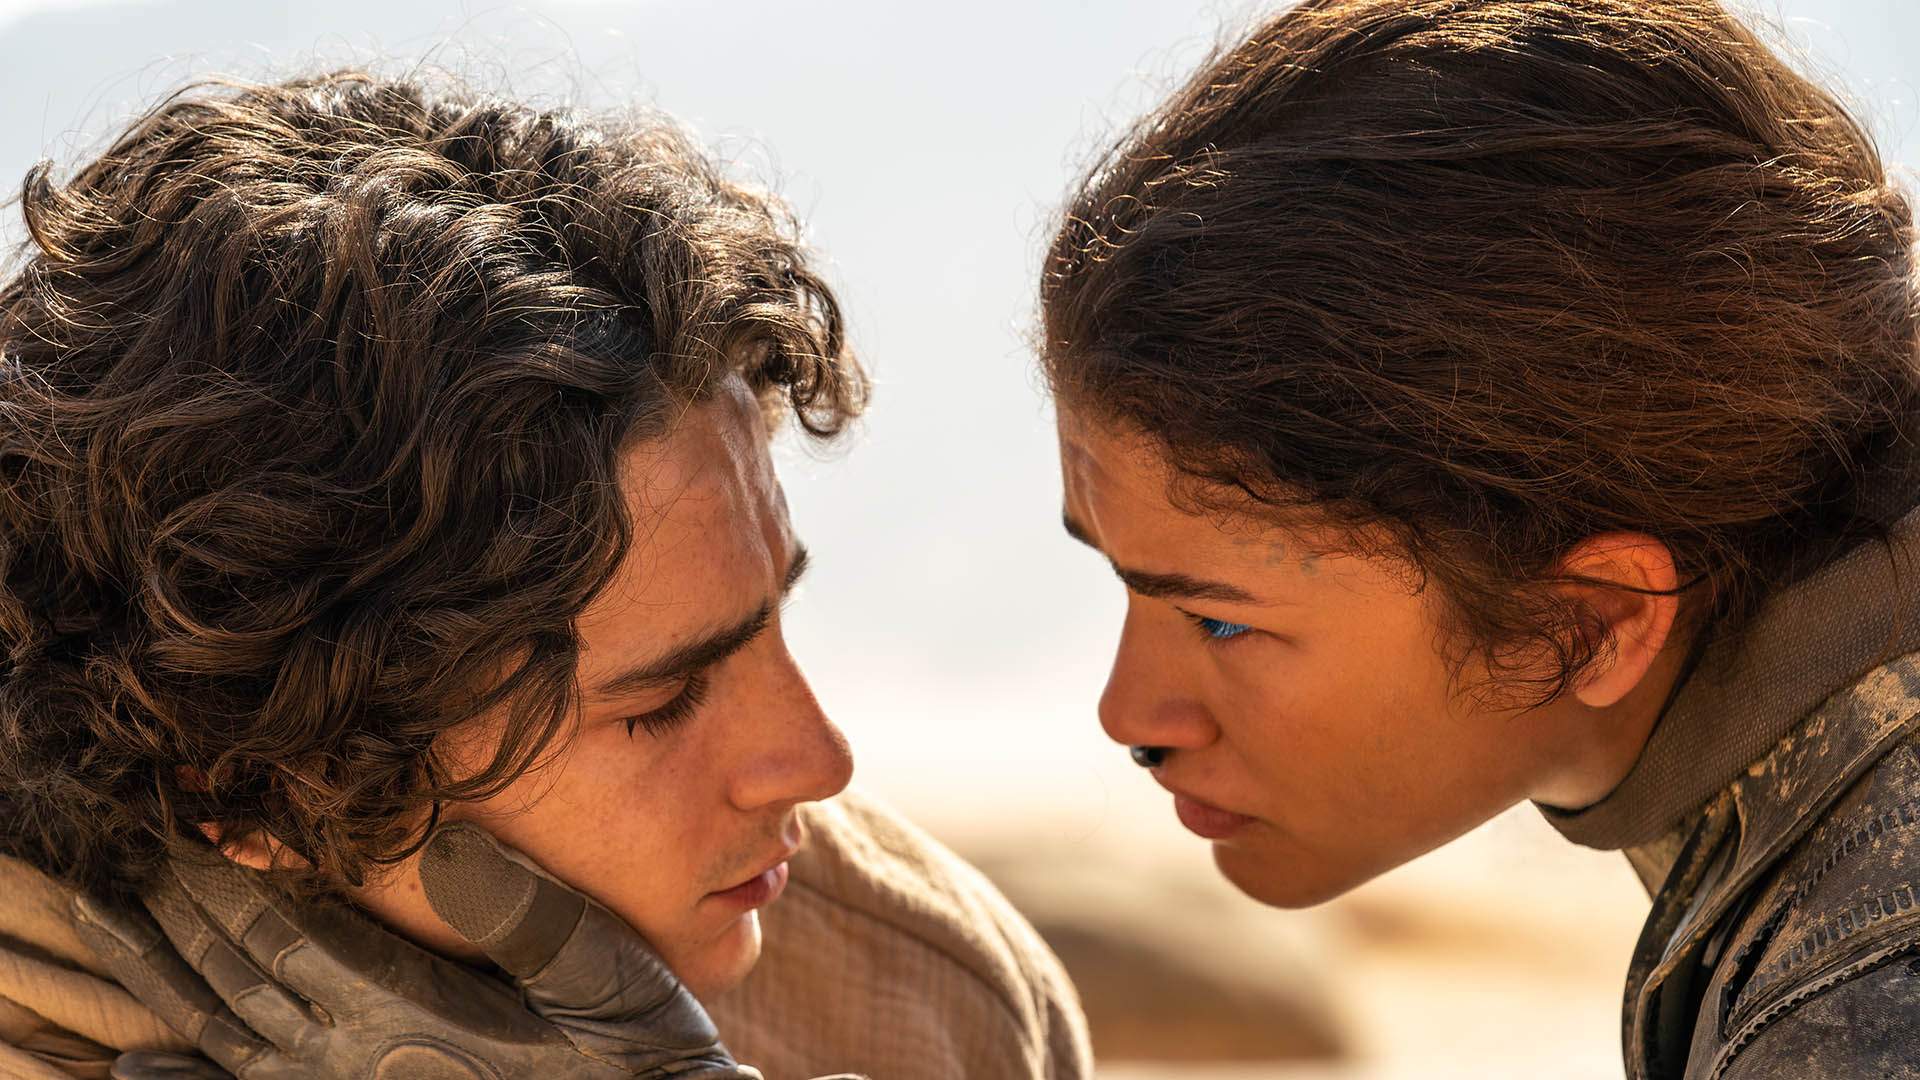 Timothée Chalamet and Zendaya Fight for Freedom and Arrakis in the New Trailer for 'Dune: Part Two'